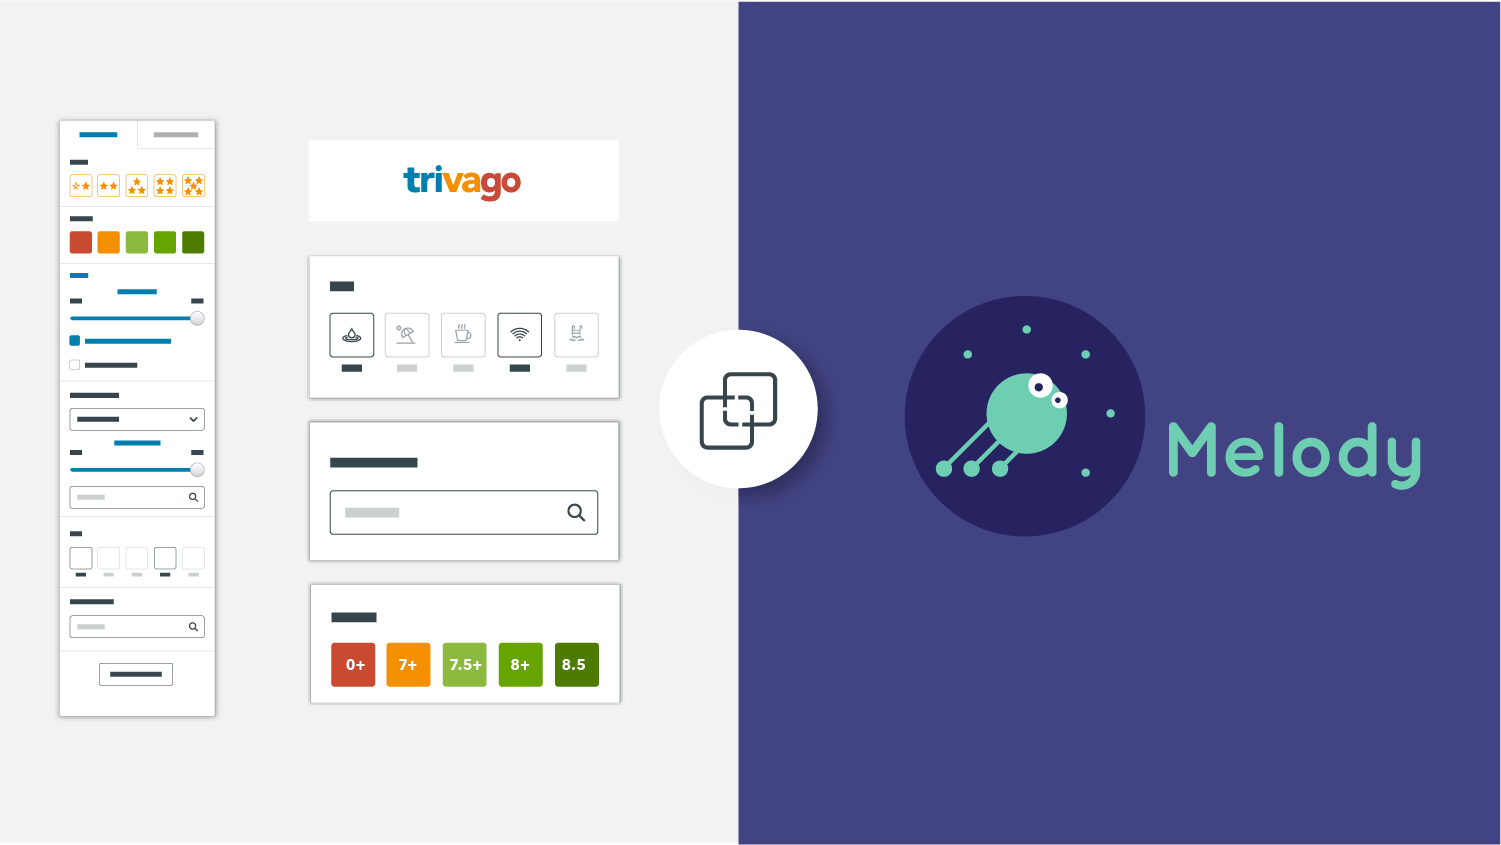 Read trivago just made filtering faster and more accessible, but why and how?